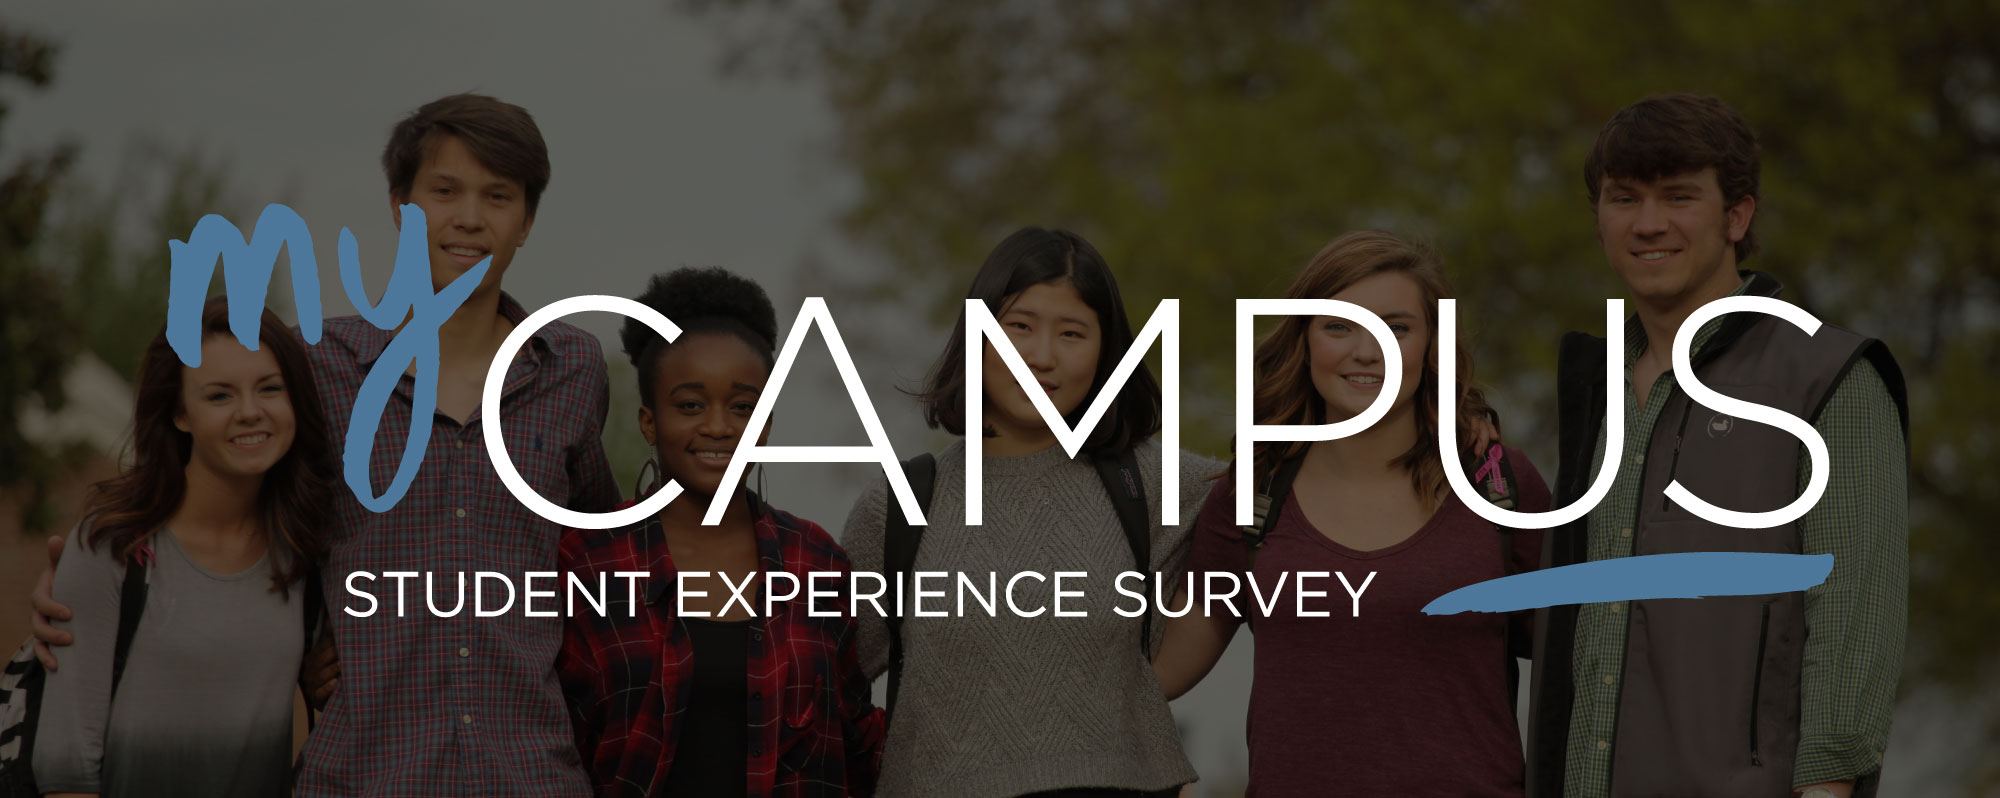 My Campus Student Experience Survey